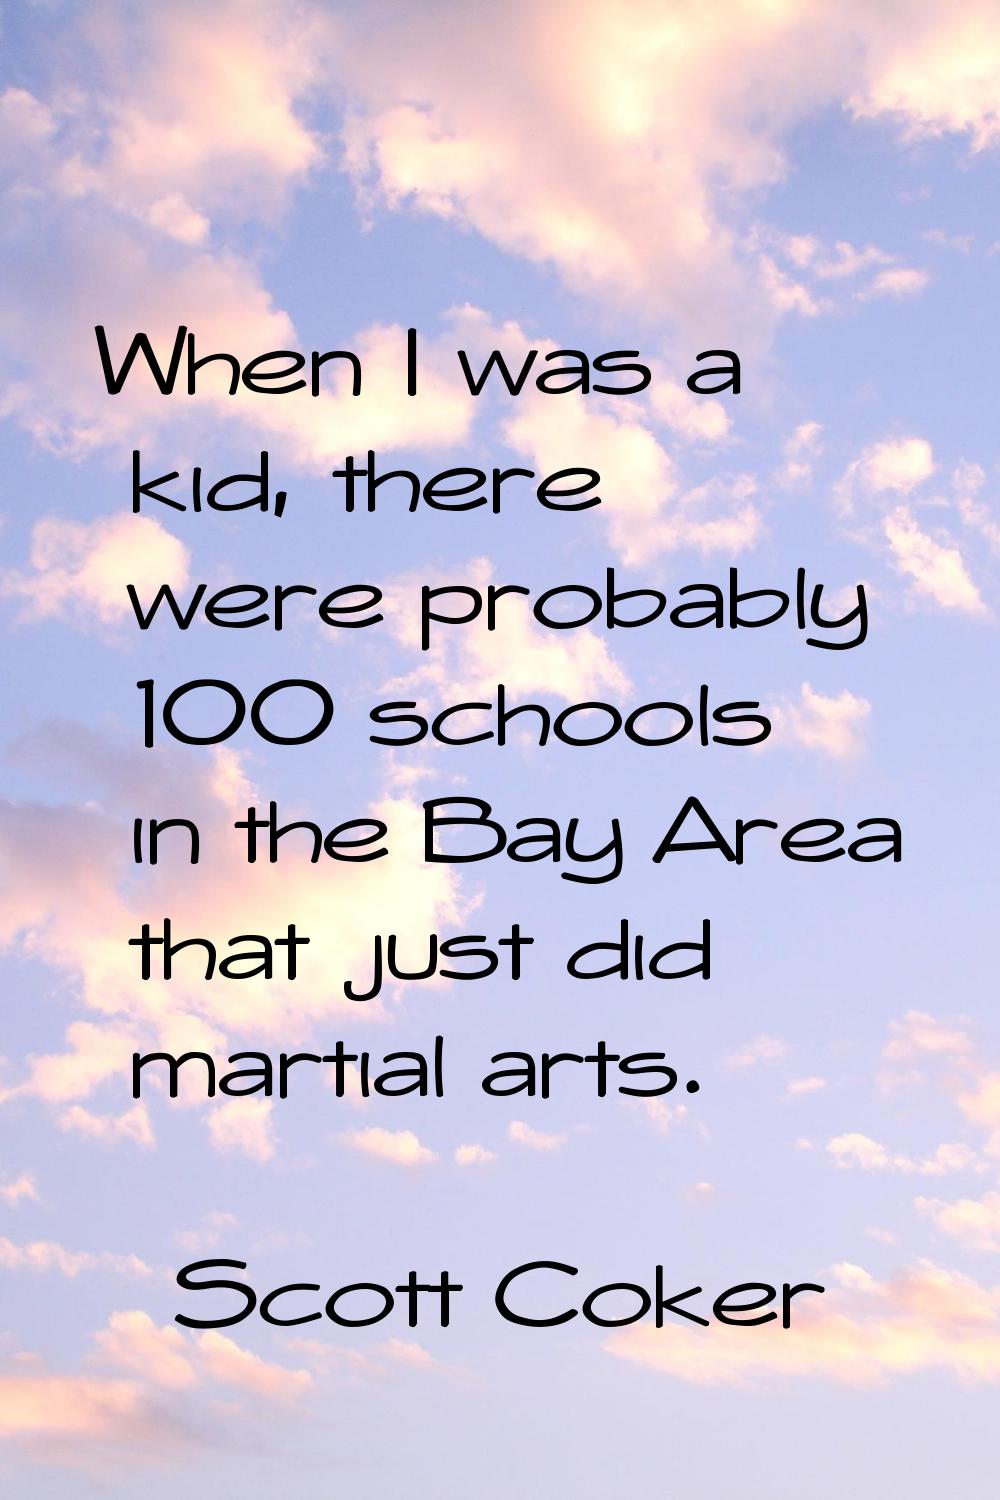 When I was a kid, there were probably 100 schools in the Bay Area that just did martial arts.